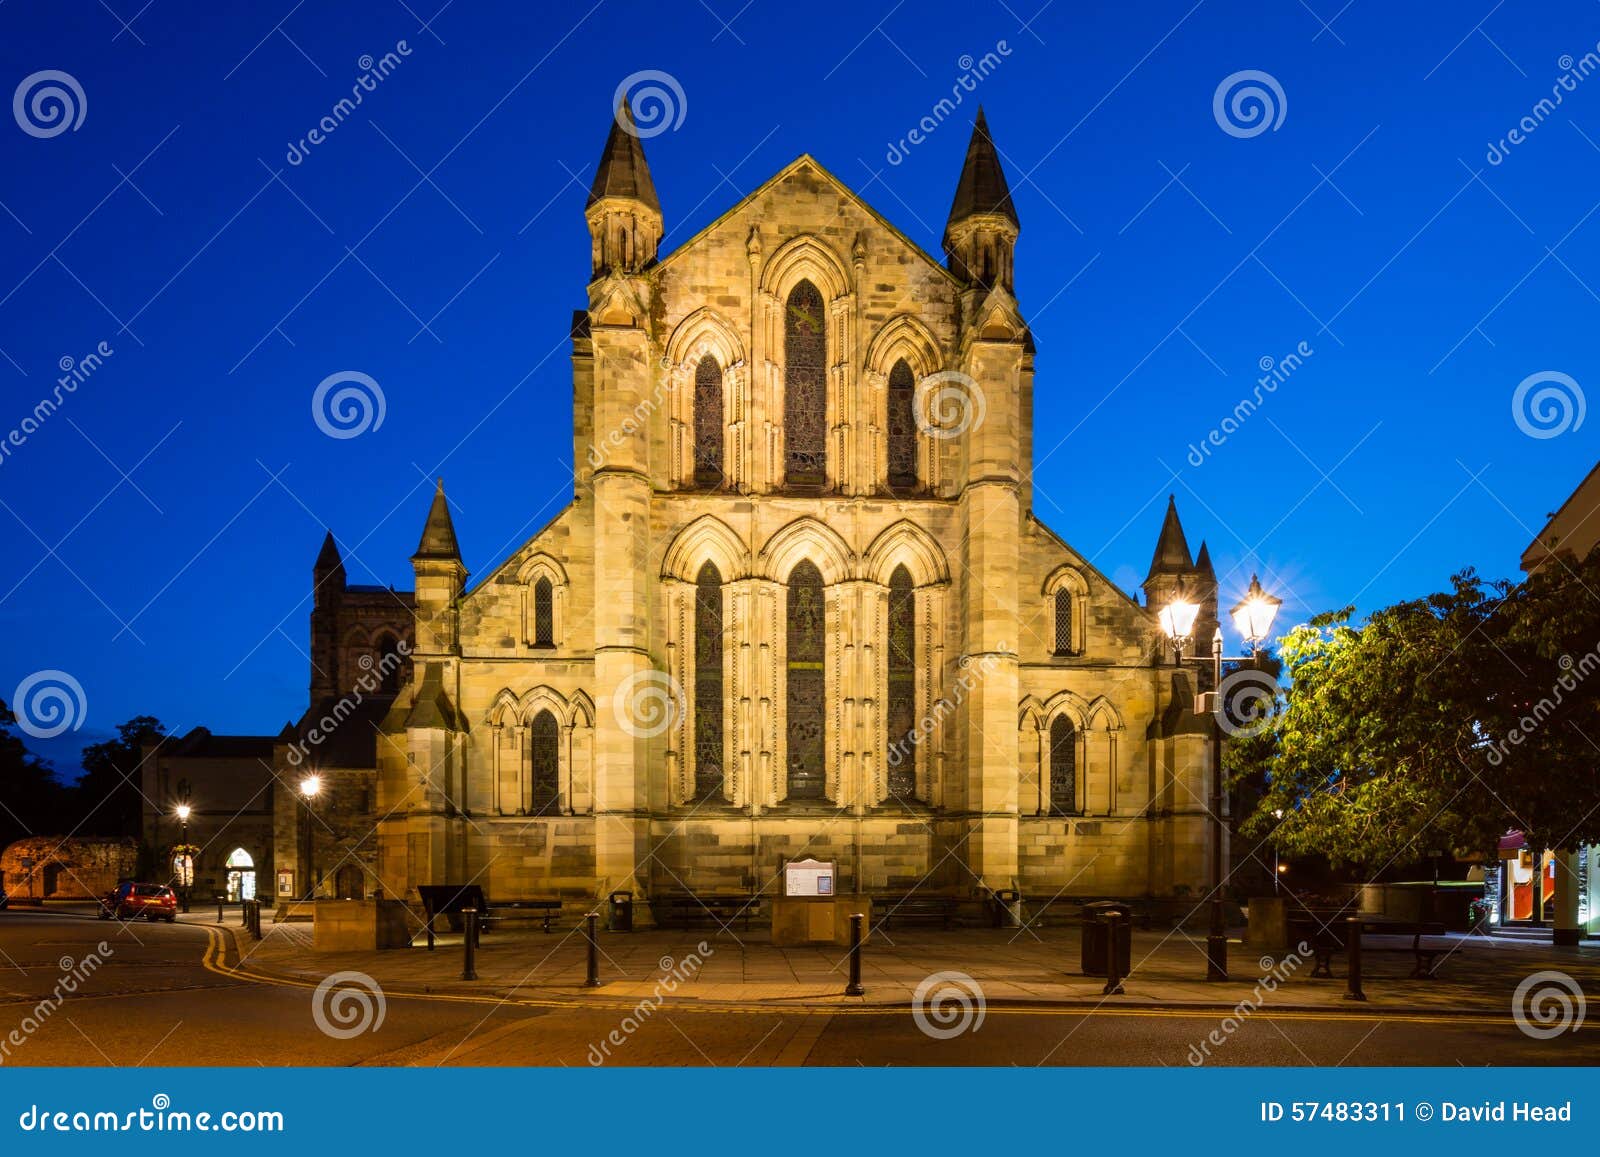 east side of hexham abbey at night